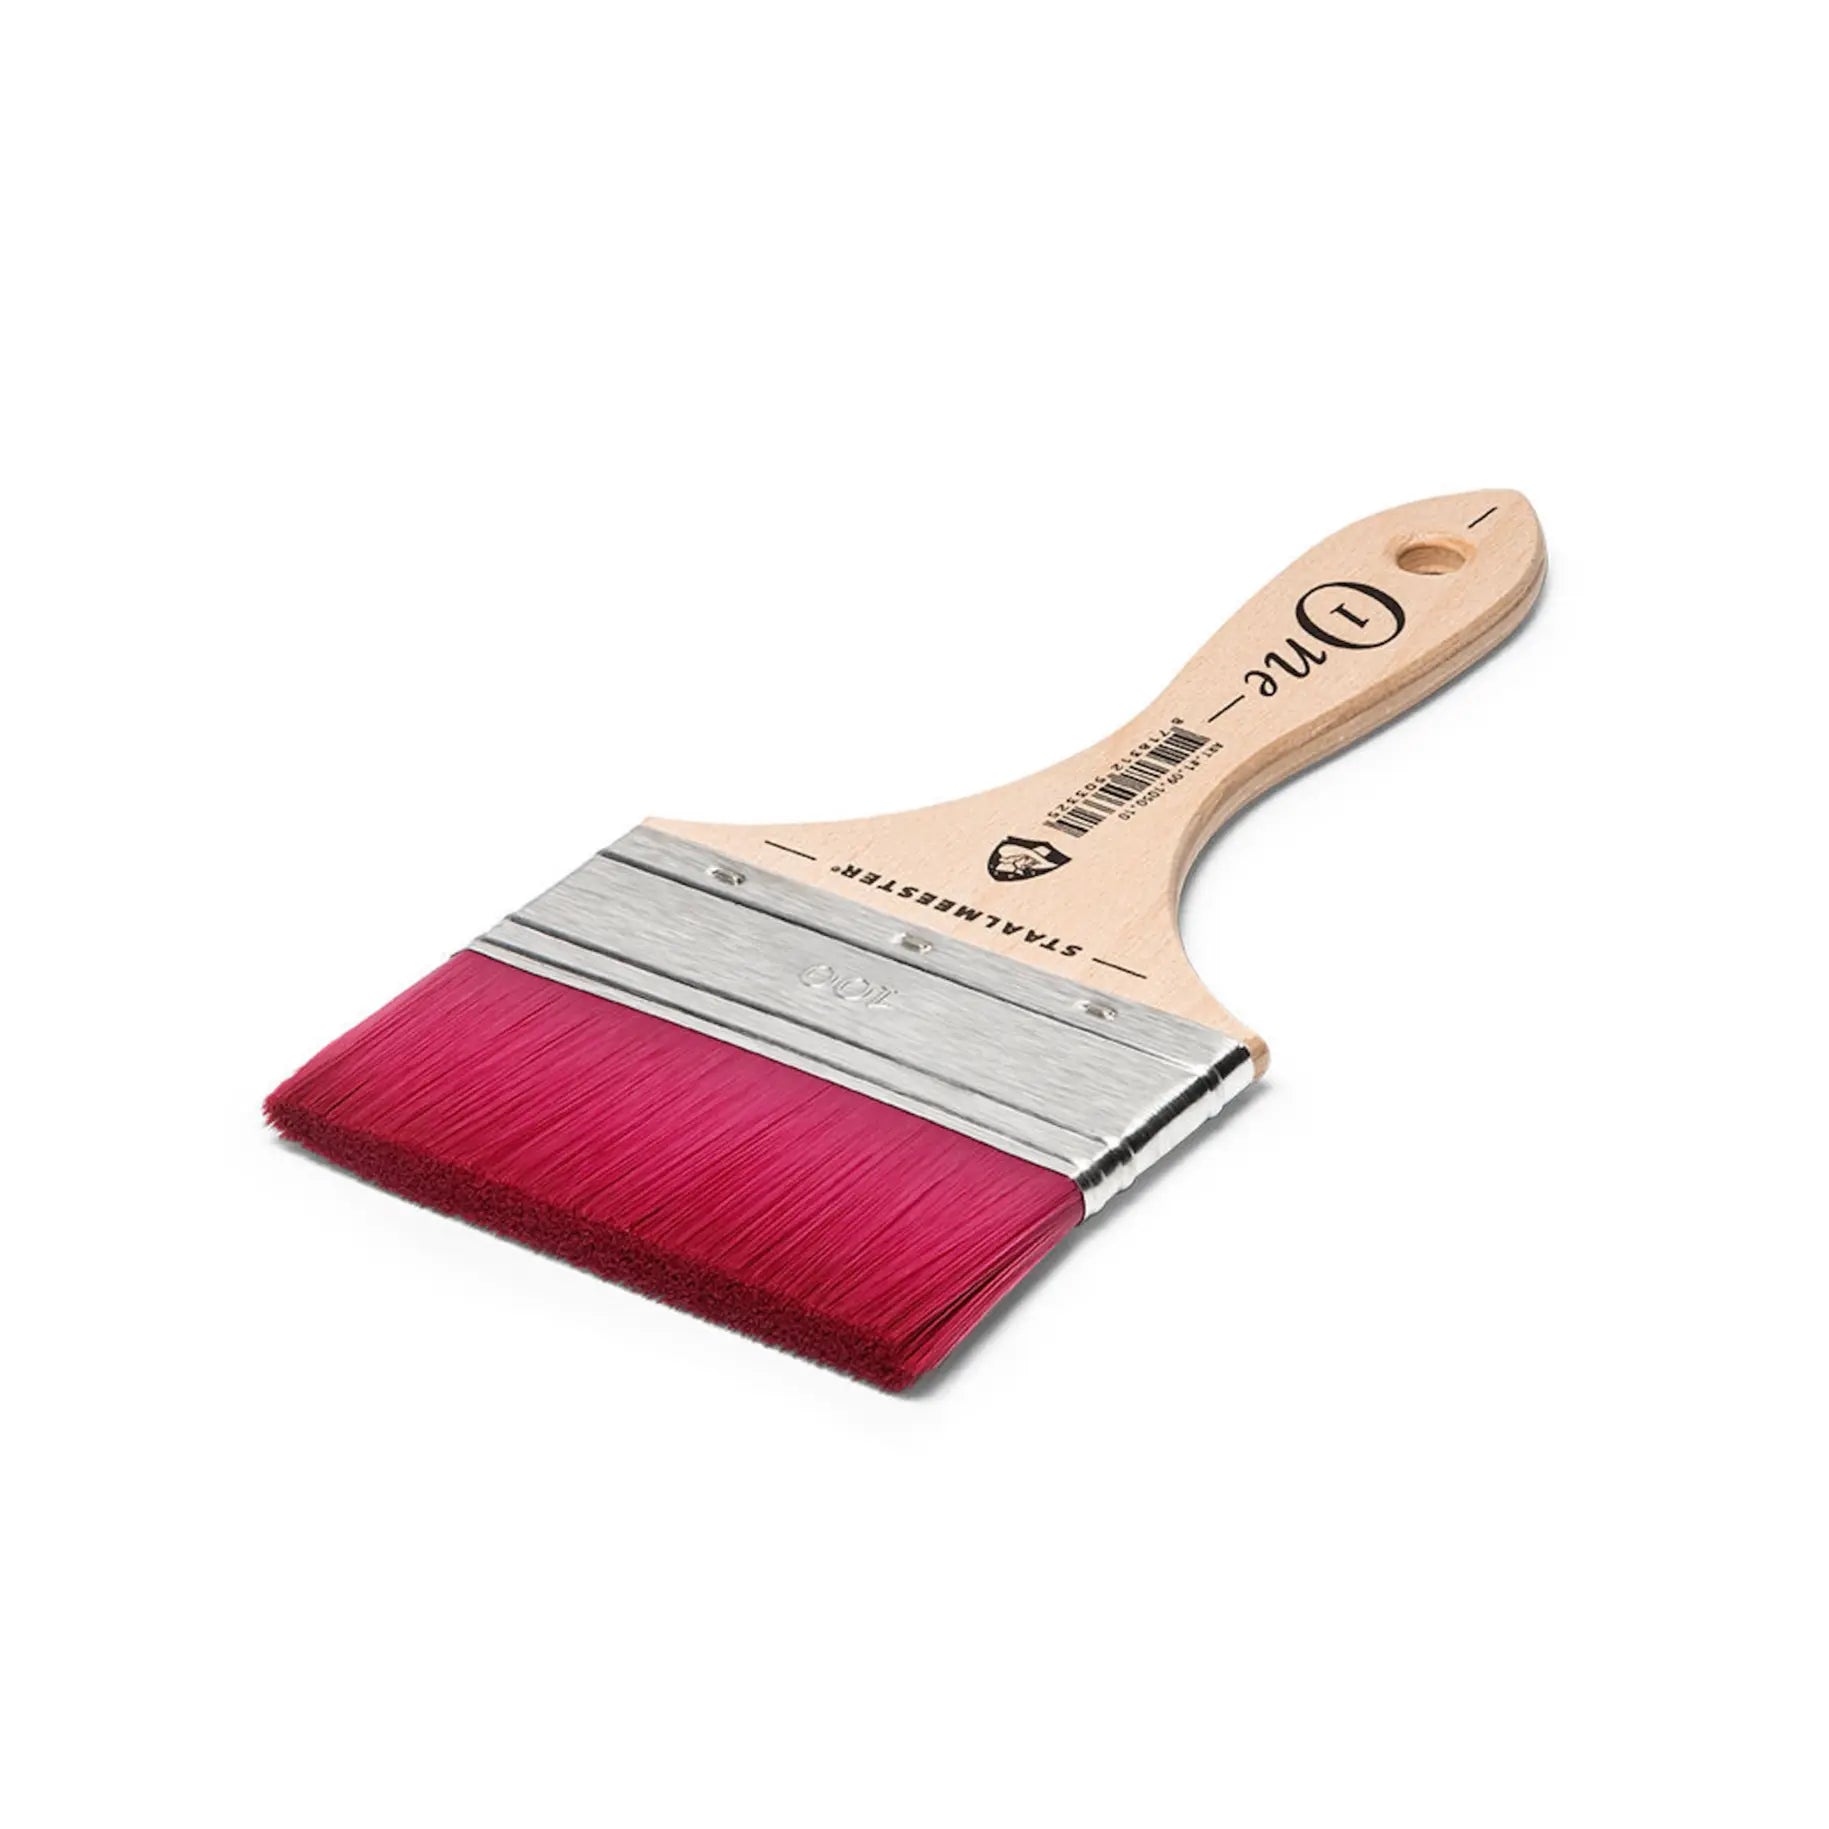 Home Smith ONE Series Wide Flat Spalter Brushes Staalmeester Brushes and Tools